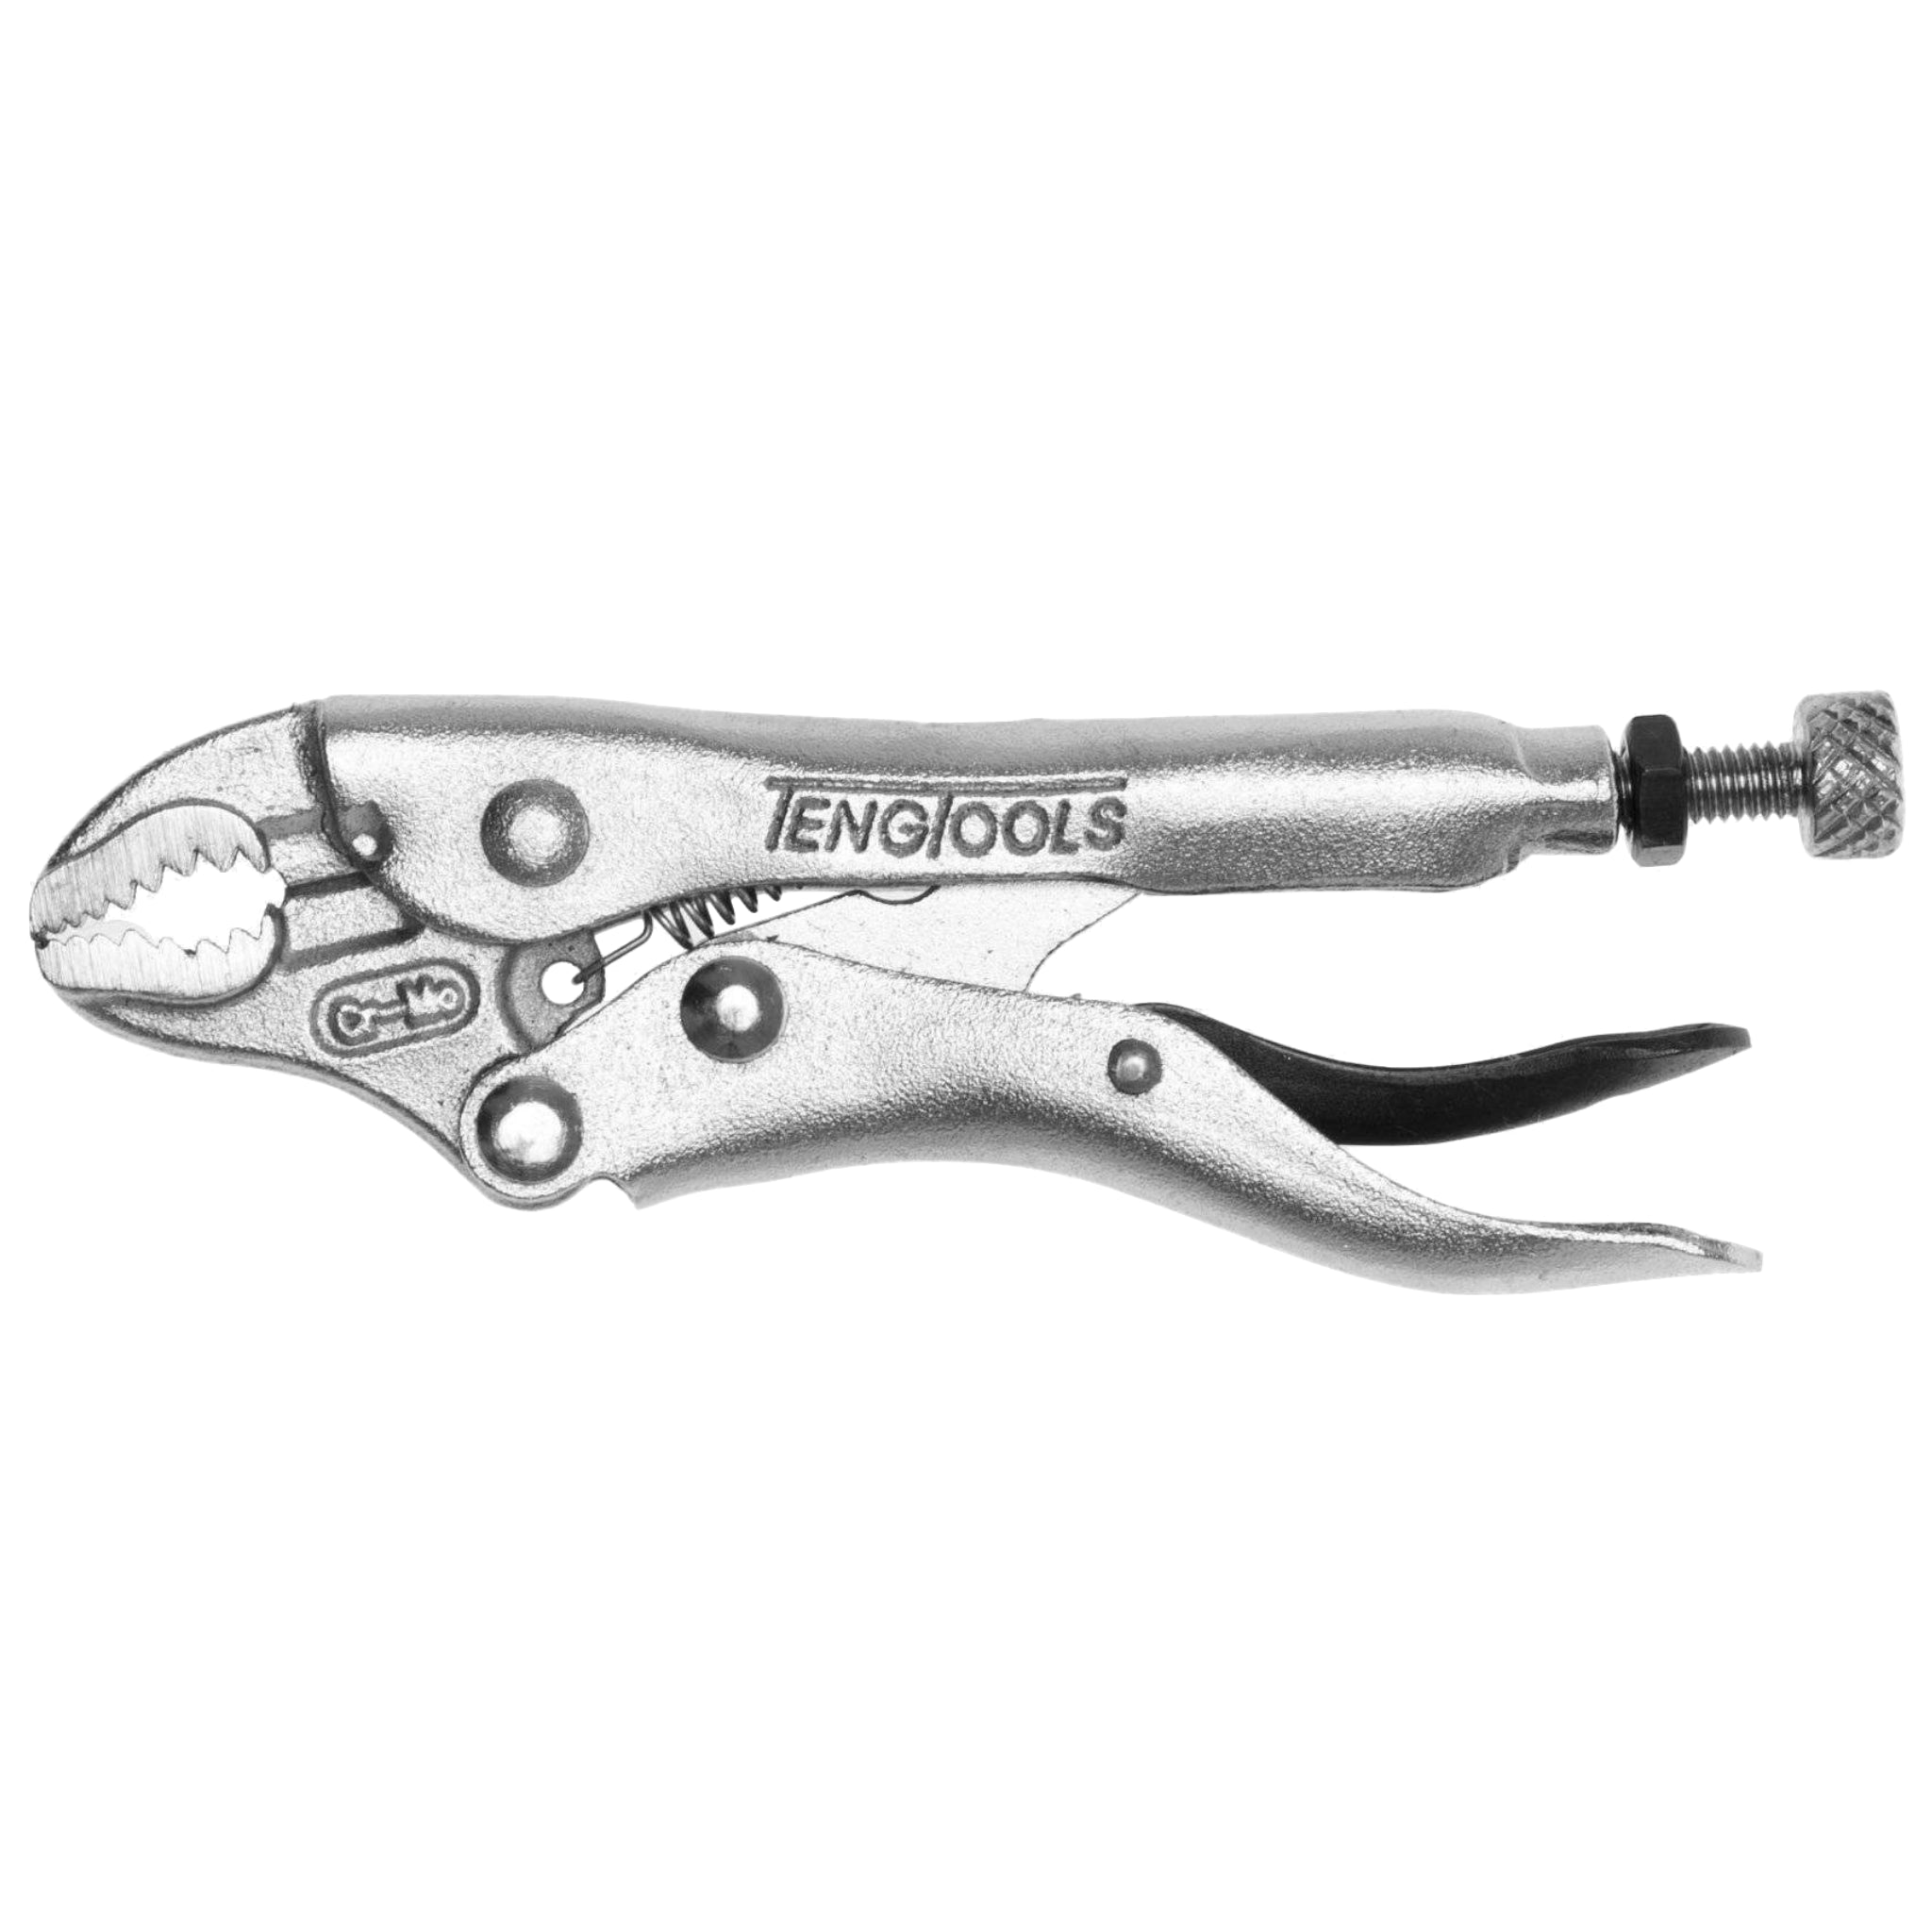 Teng Tools Locking Vise Grip Style Pliers With Curved Jaws - 12 Inch